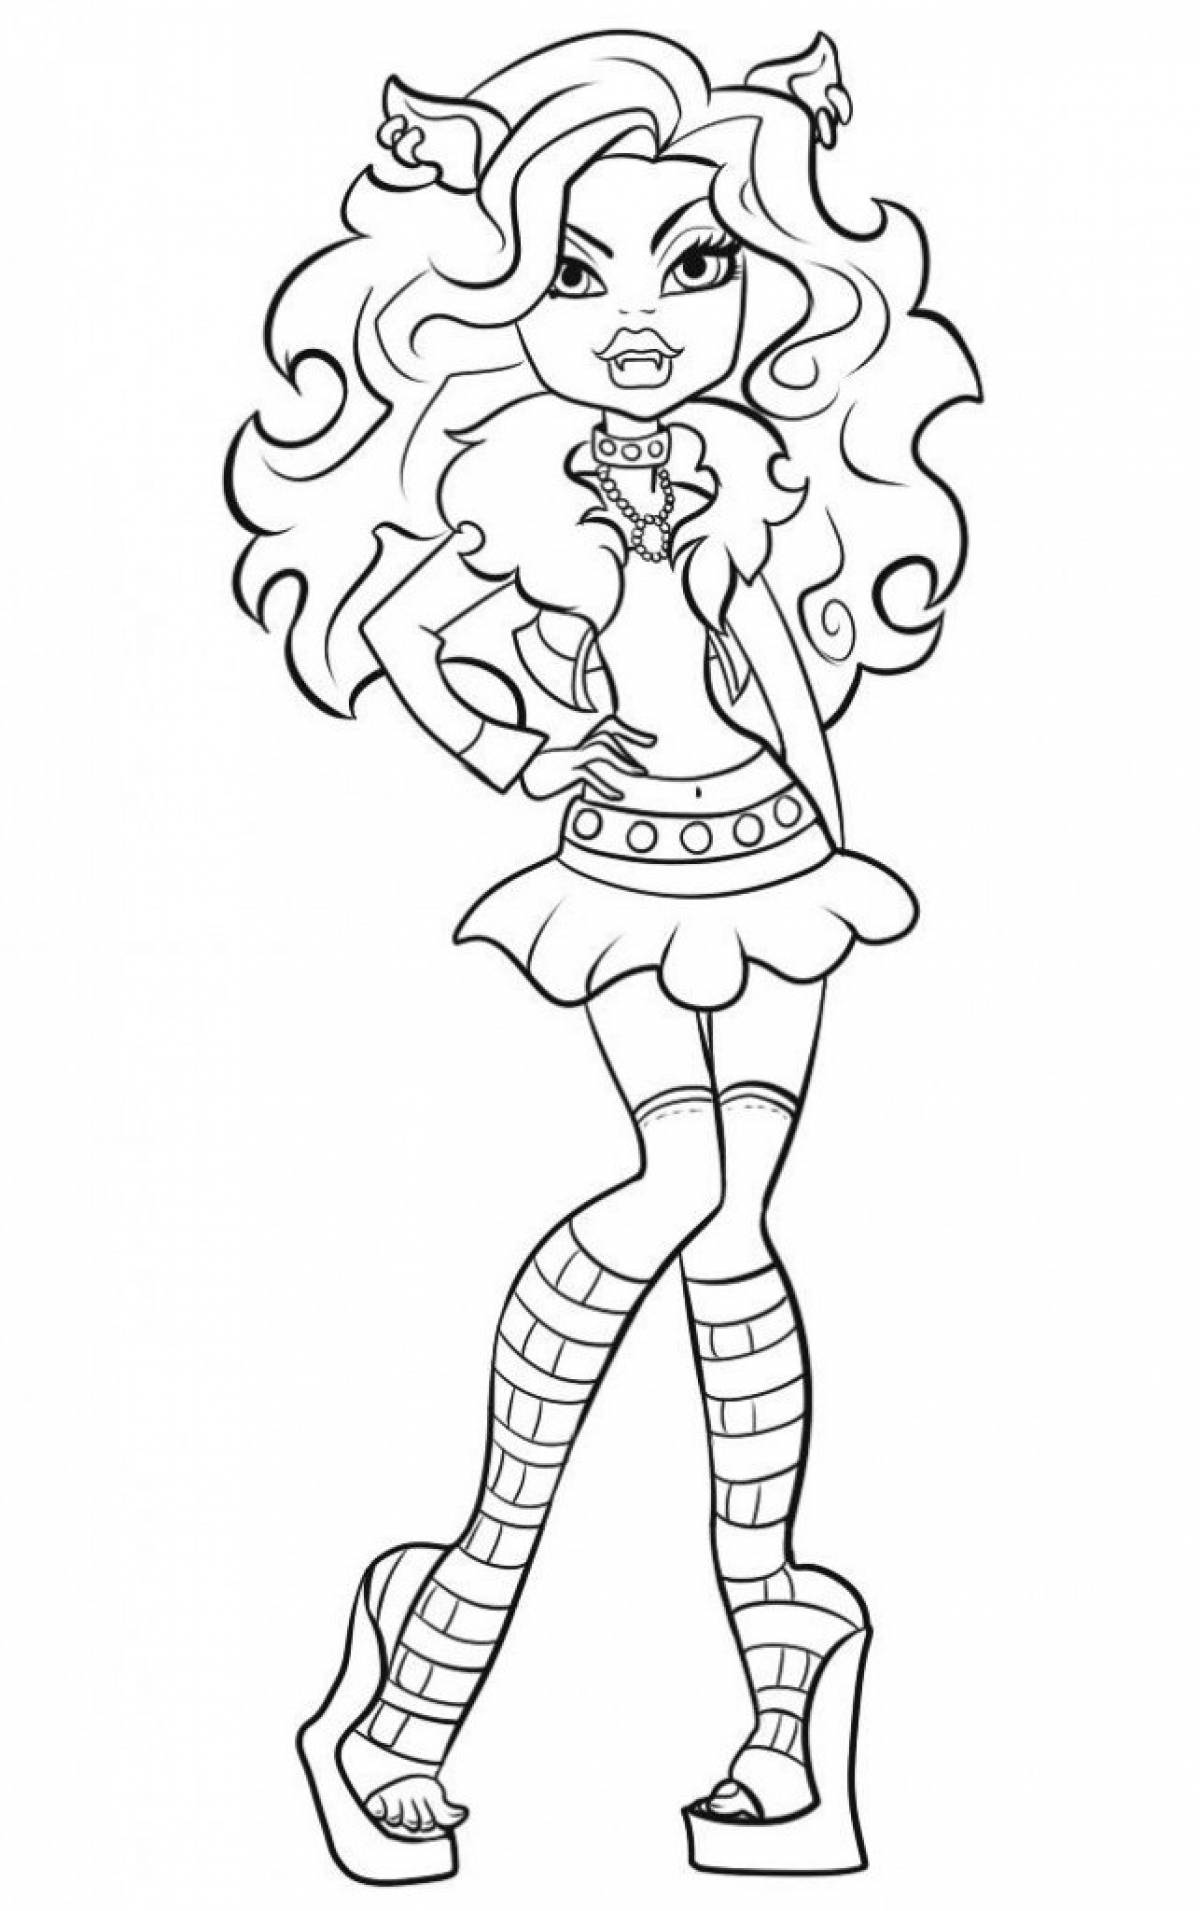 Monster high coloring pages free